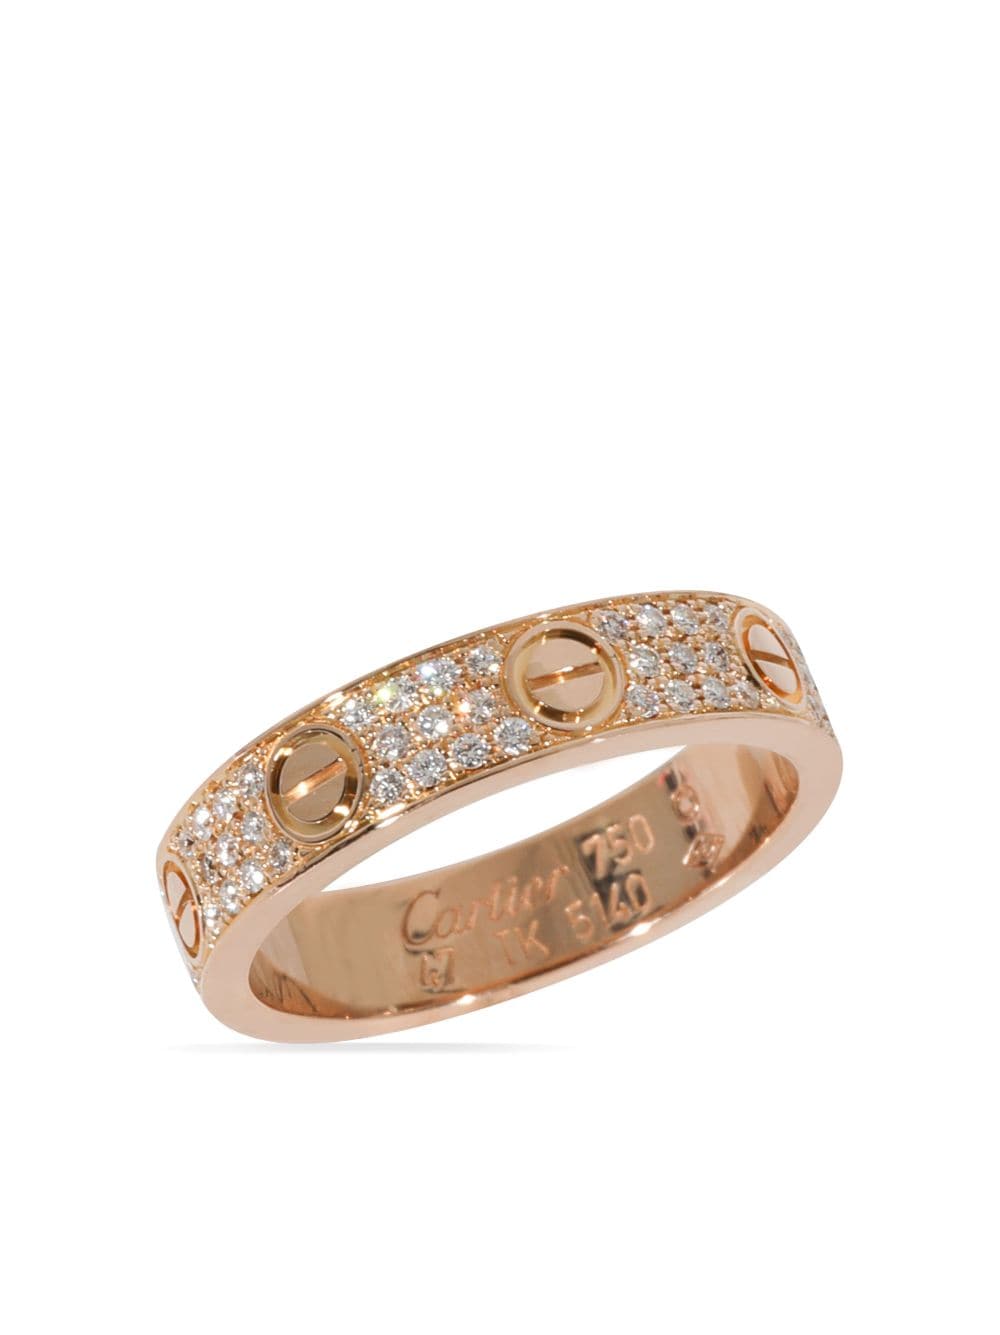 Pre-owned Cartier  18kt Rose Gold Love Diamond Ring